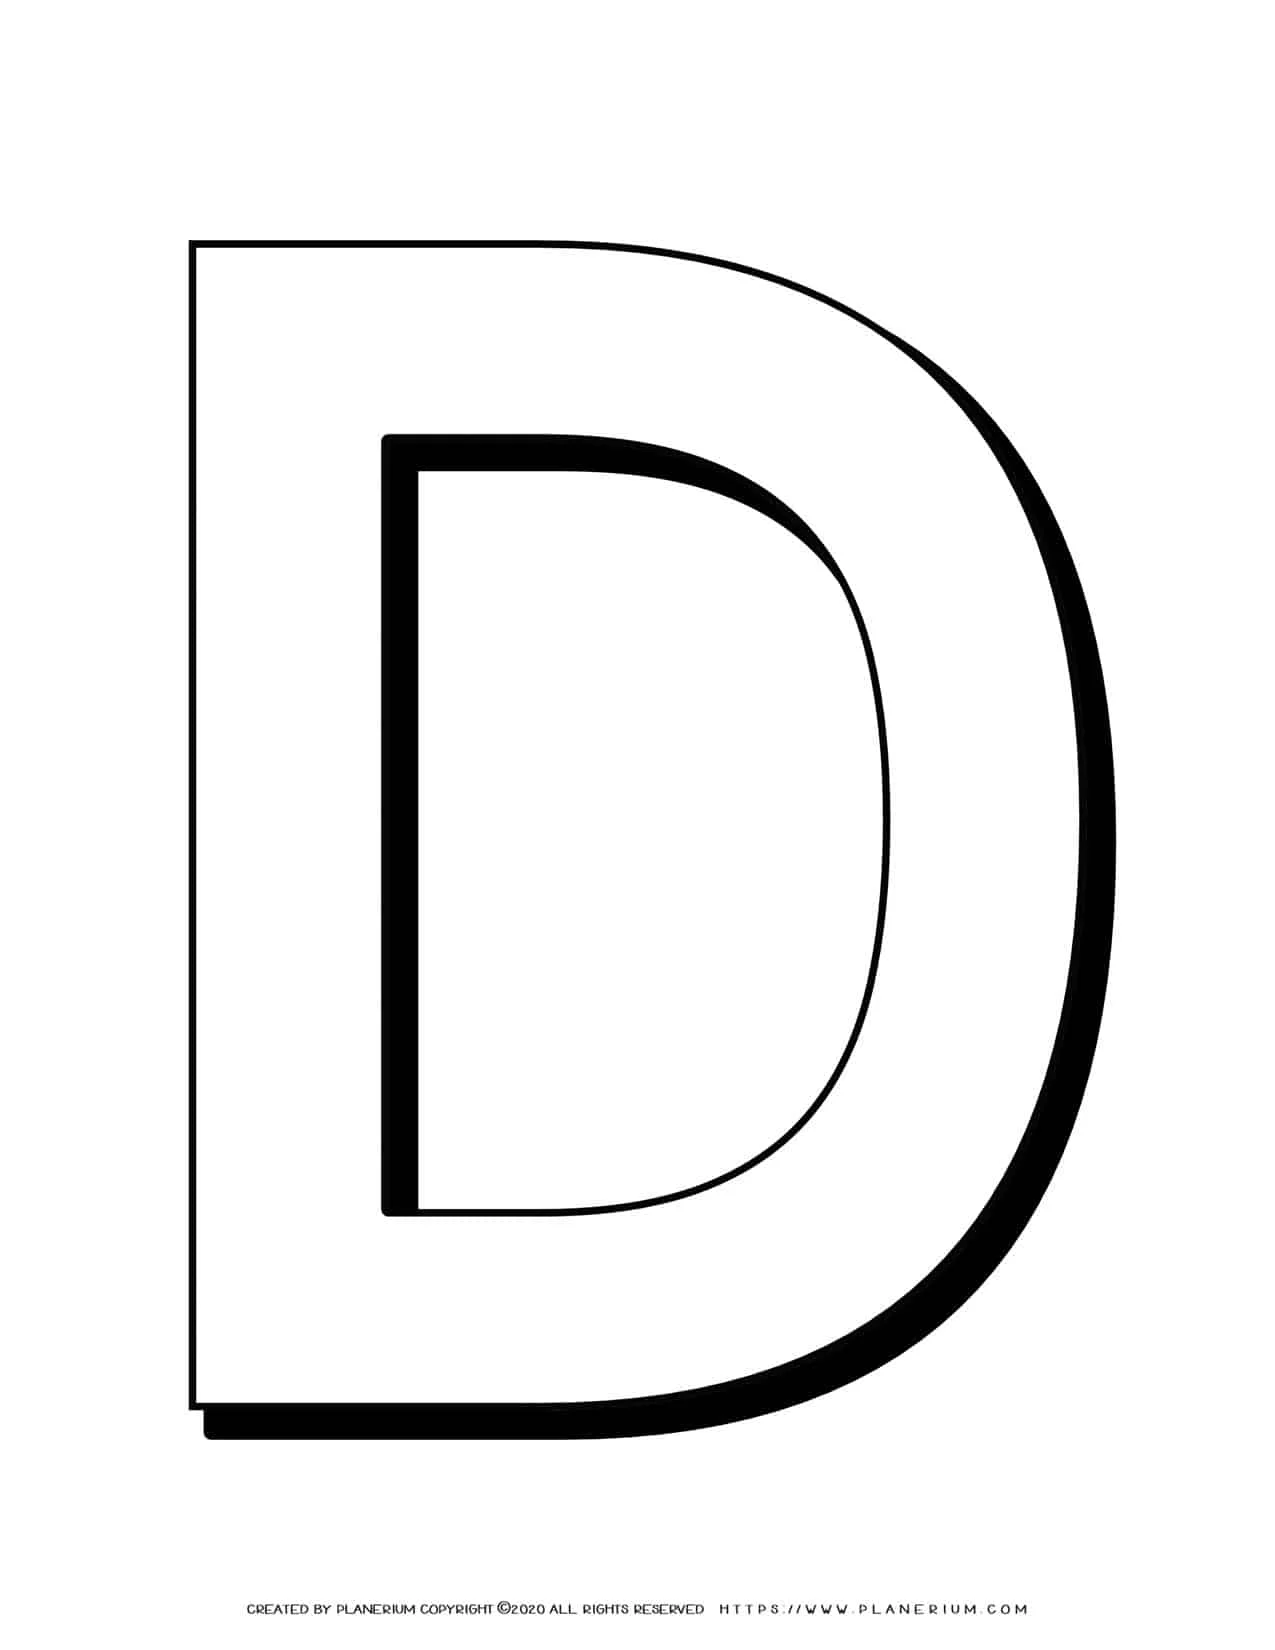 The Letter D Coloring Pages